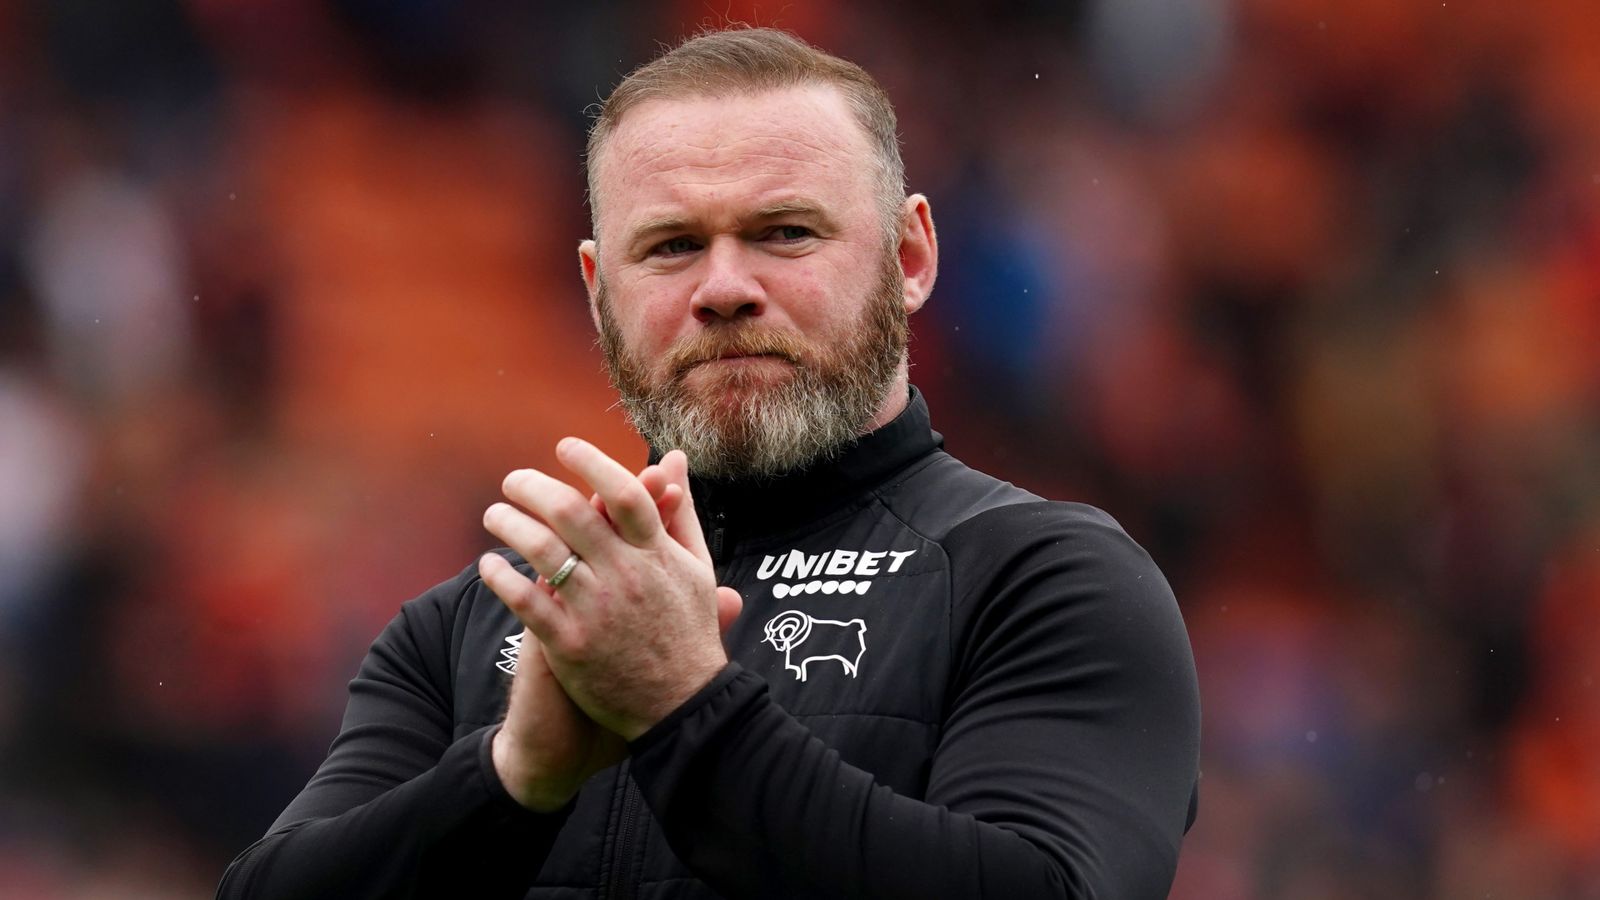 Wayne Rooney quits as Derby County boss - 'The club needs fresh energy' | Football News | Sky Sports